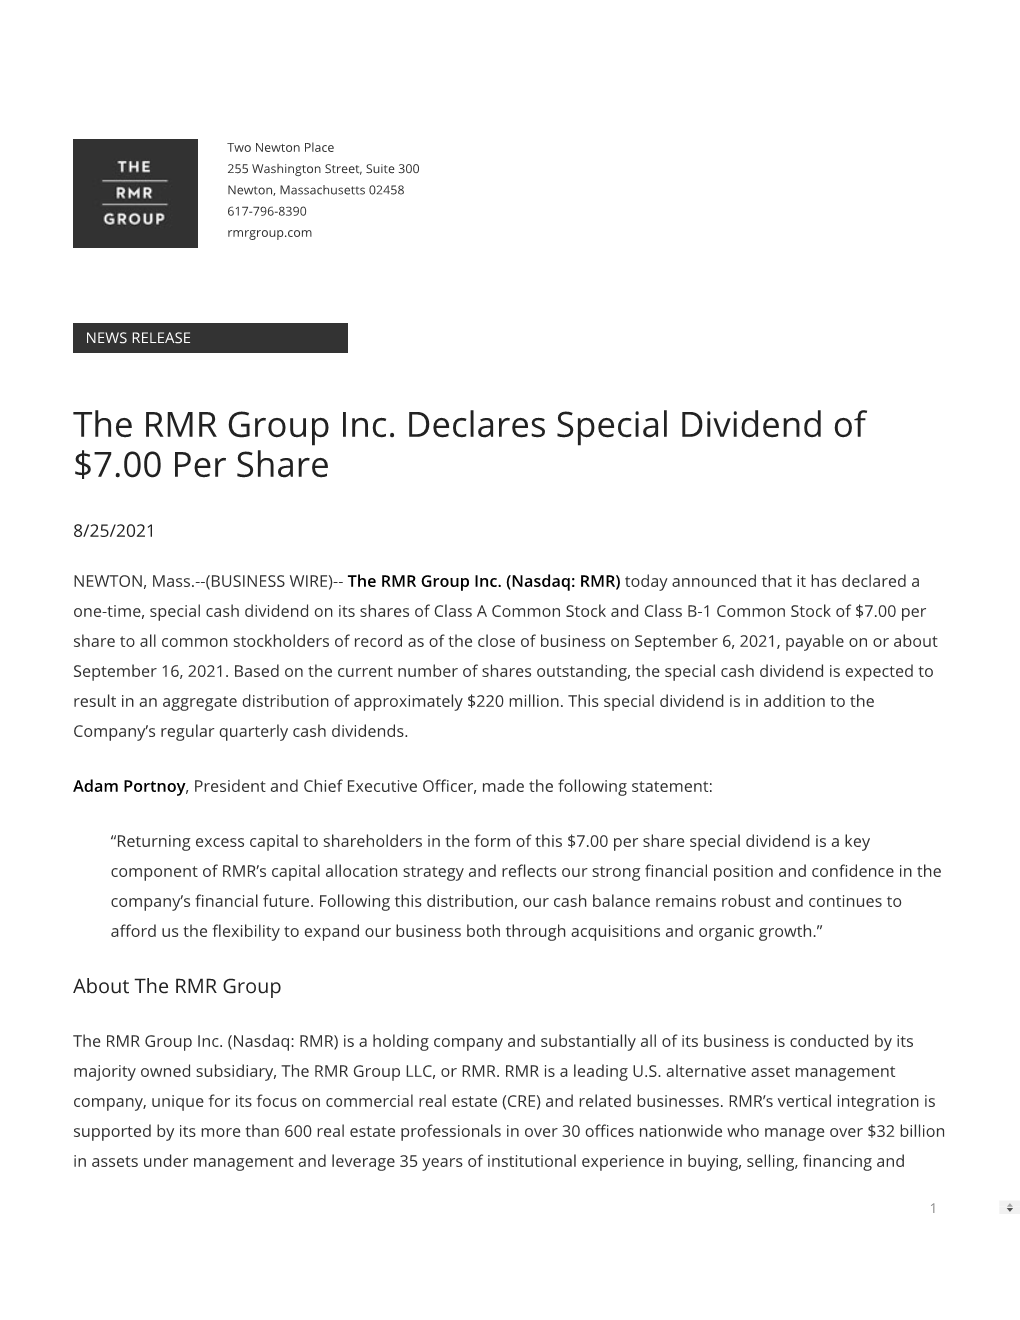 The RMR Group Inc. Declares Special Dividend of $7.00 Per Share